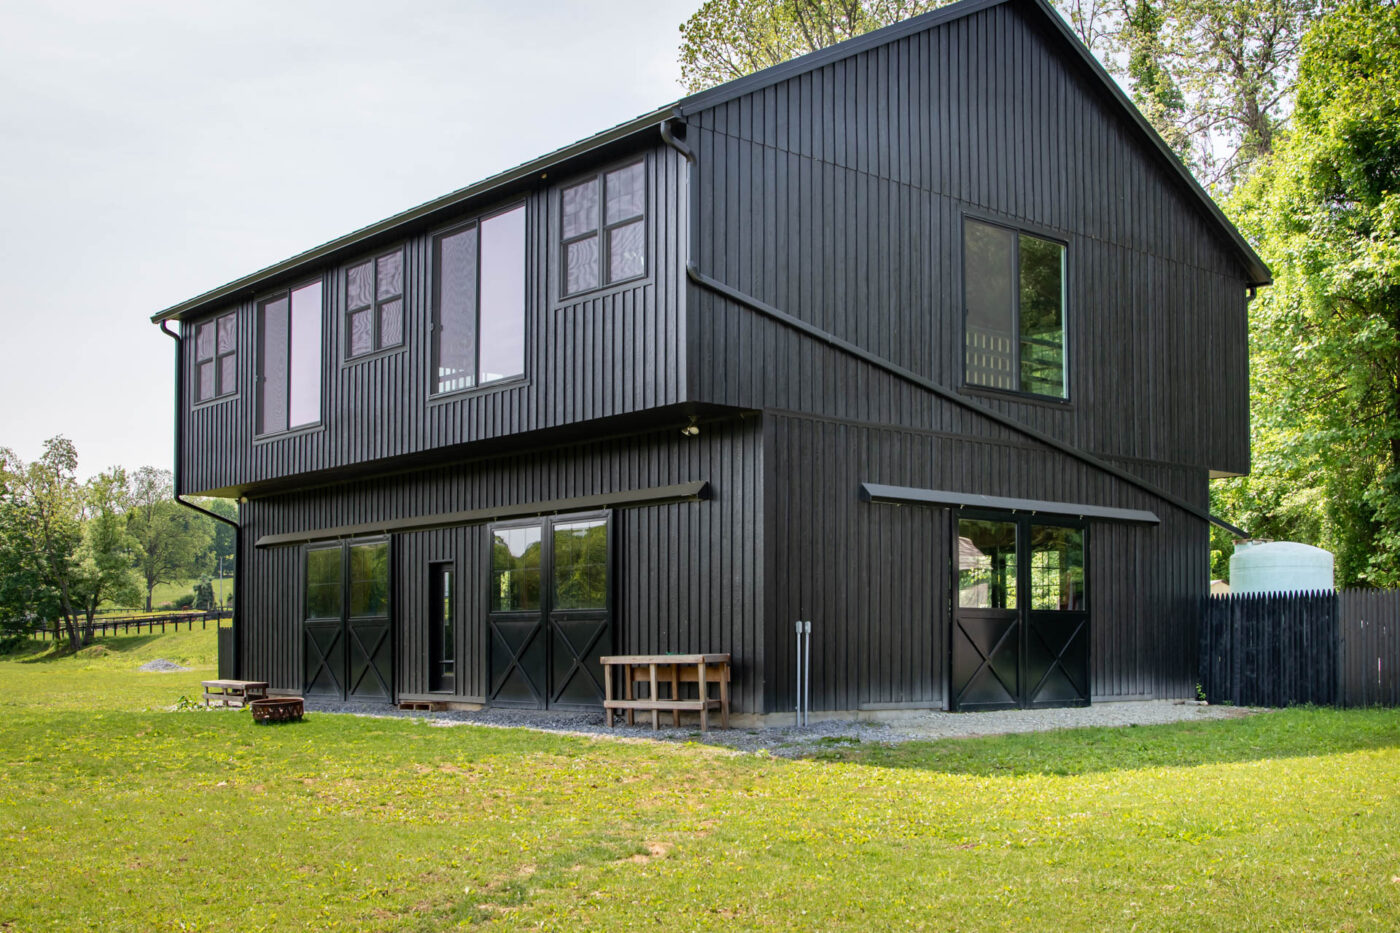 black 2-car garage with larger second story, metal roof, and sliding garage doors